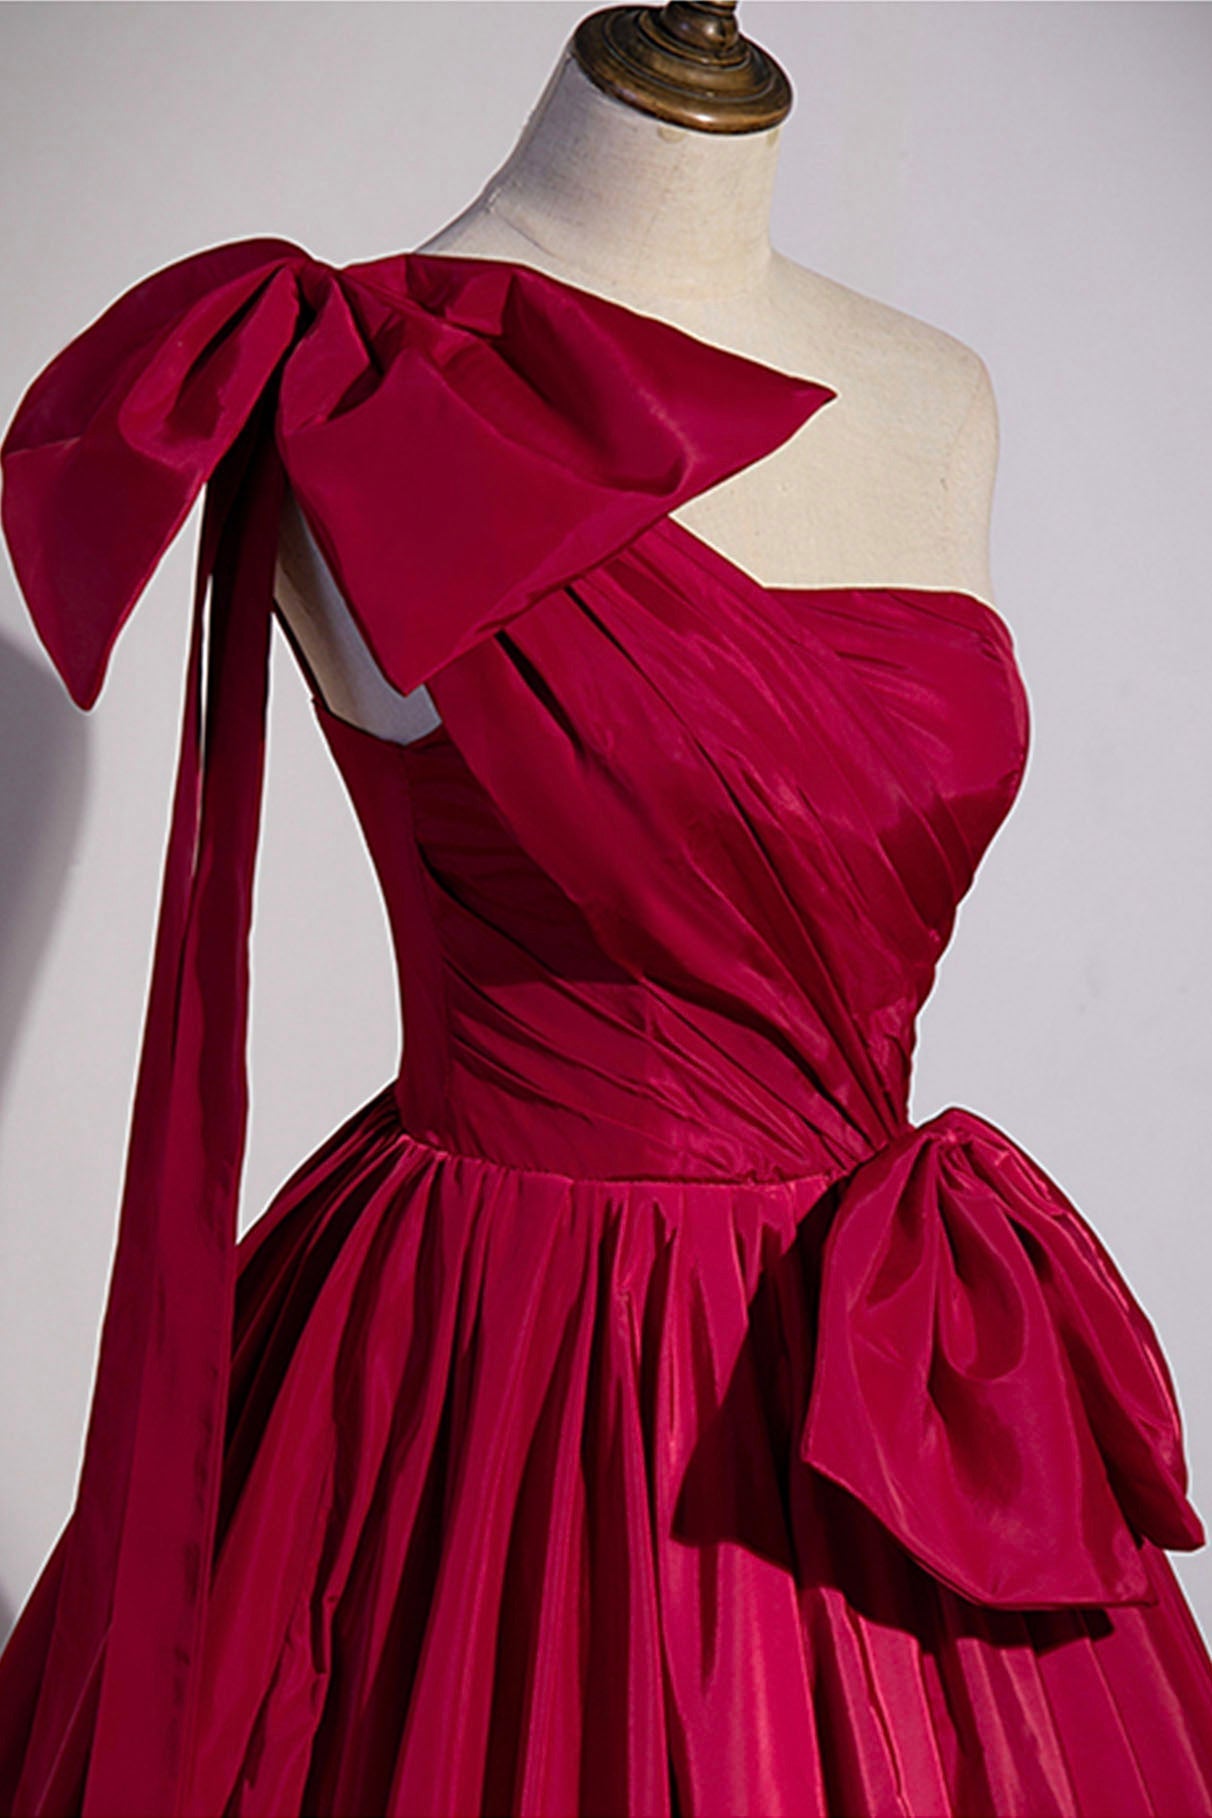 Party Dress Couple, Burgundy Satin Long Prom Dress, One Shoulder Evening Dress with Bow